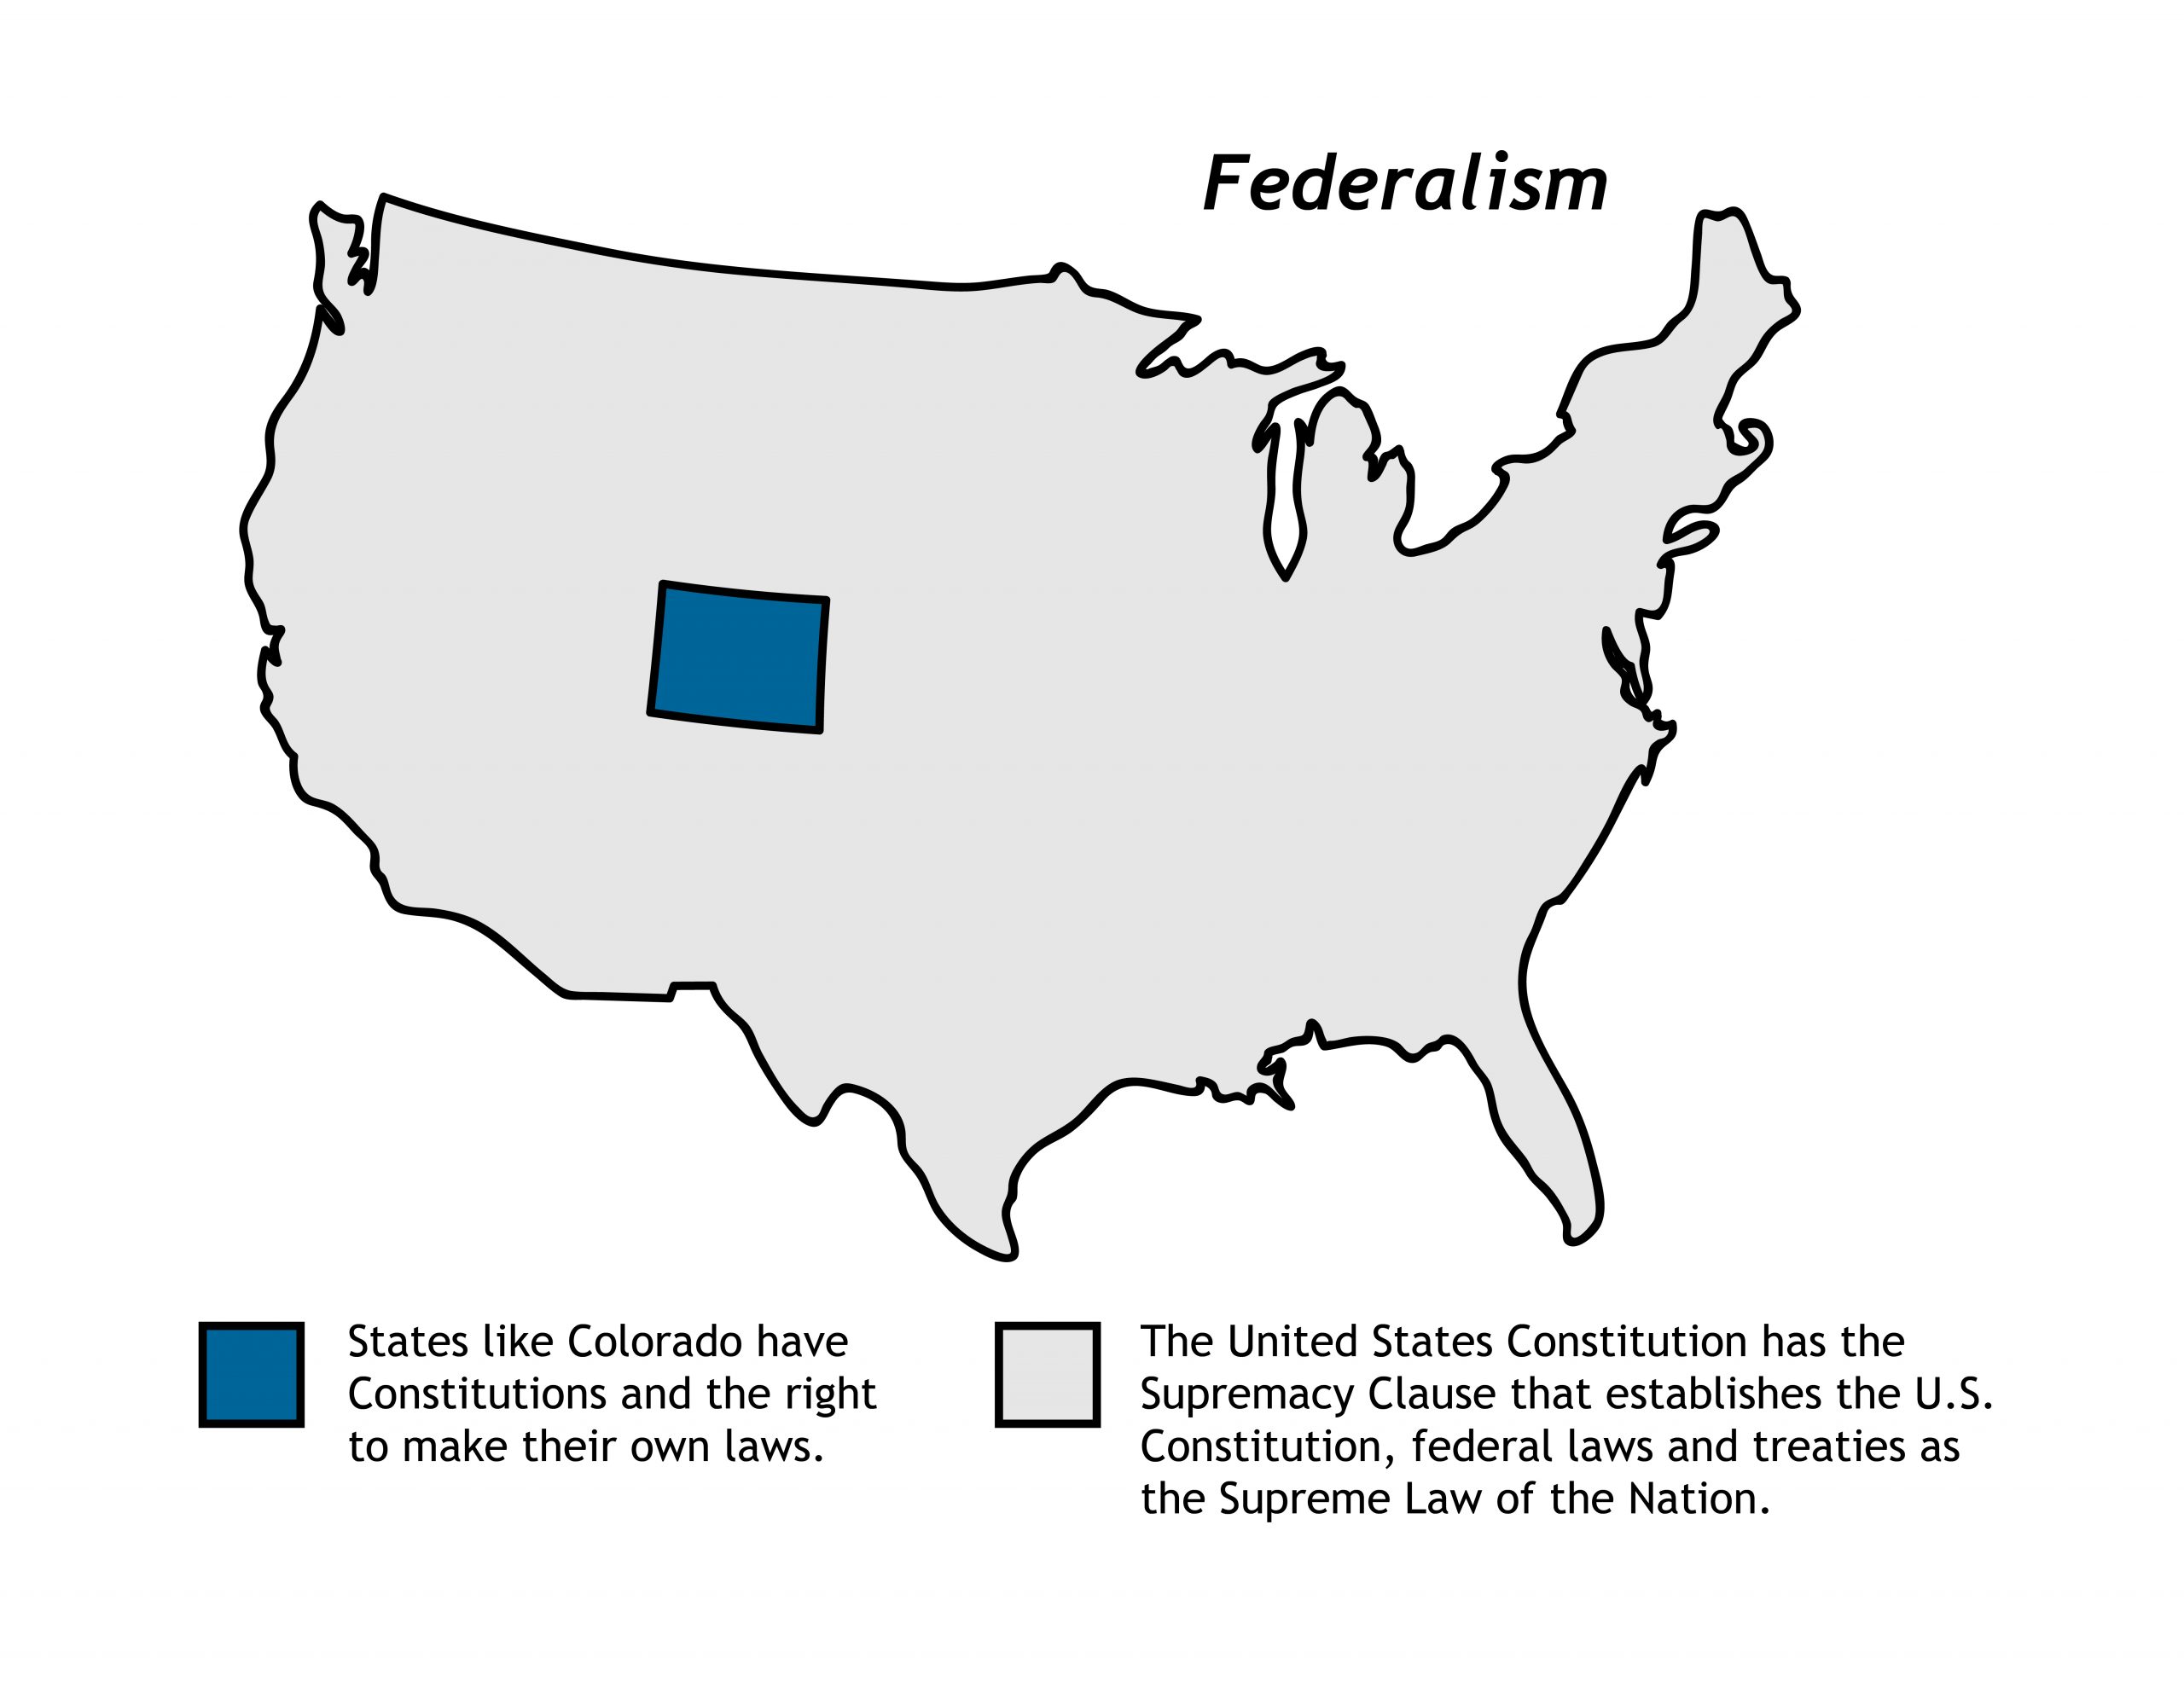 map of United States showing federalism principles